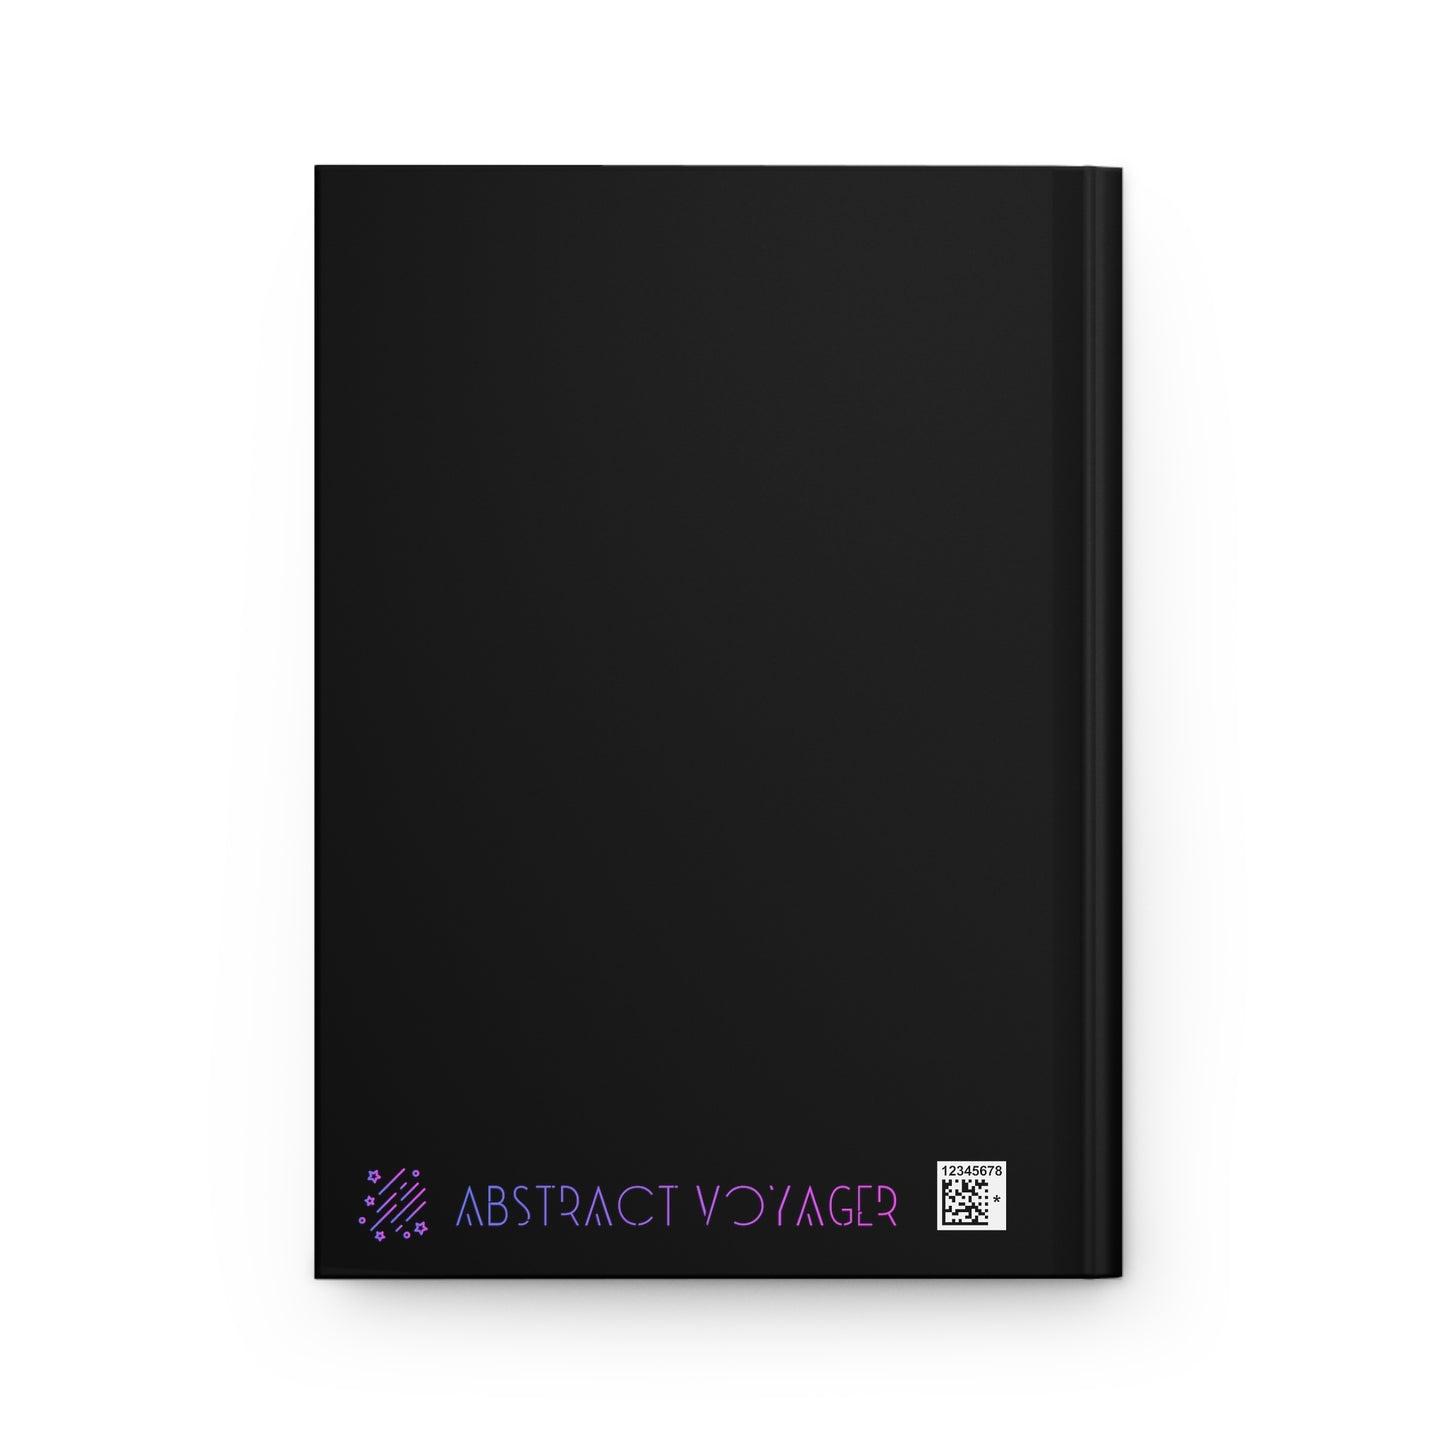 Support Indie Authors Hardcover Journal